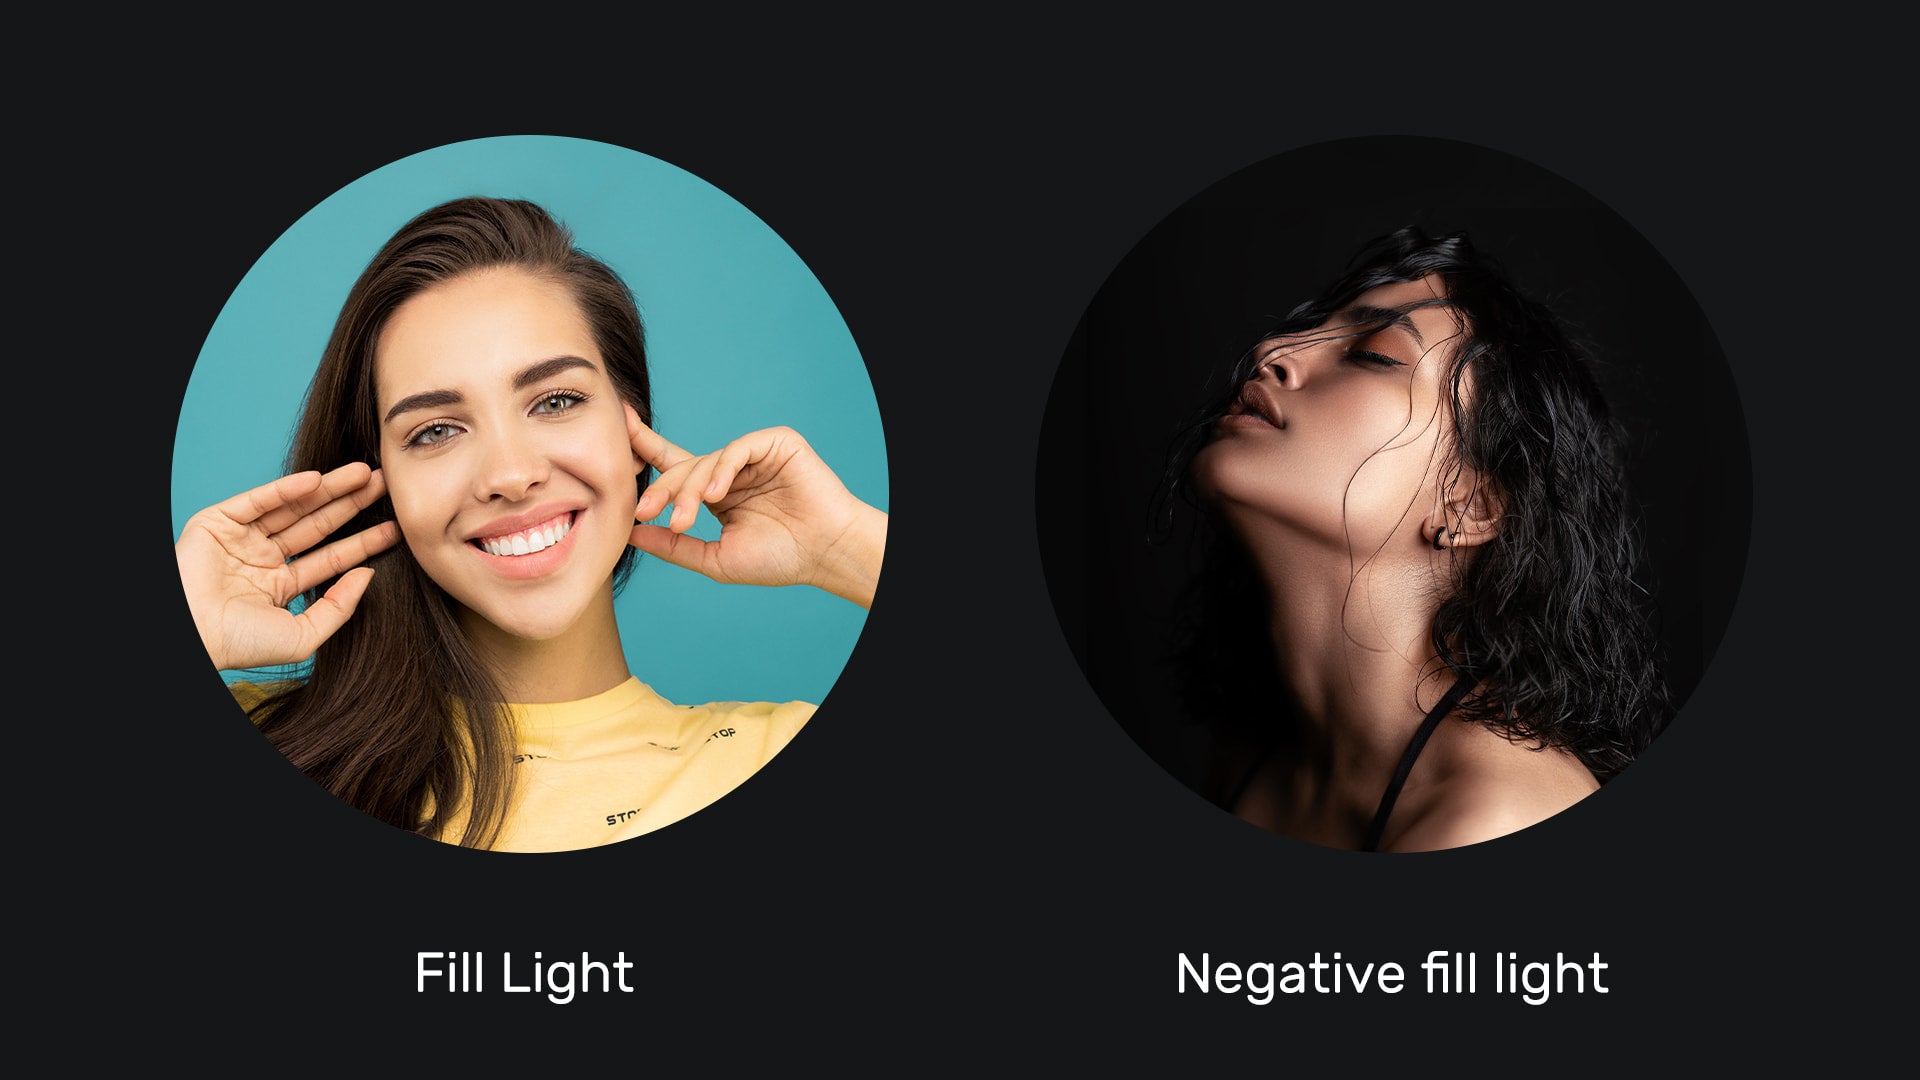 How To Take Light Away with Negative Fill! 